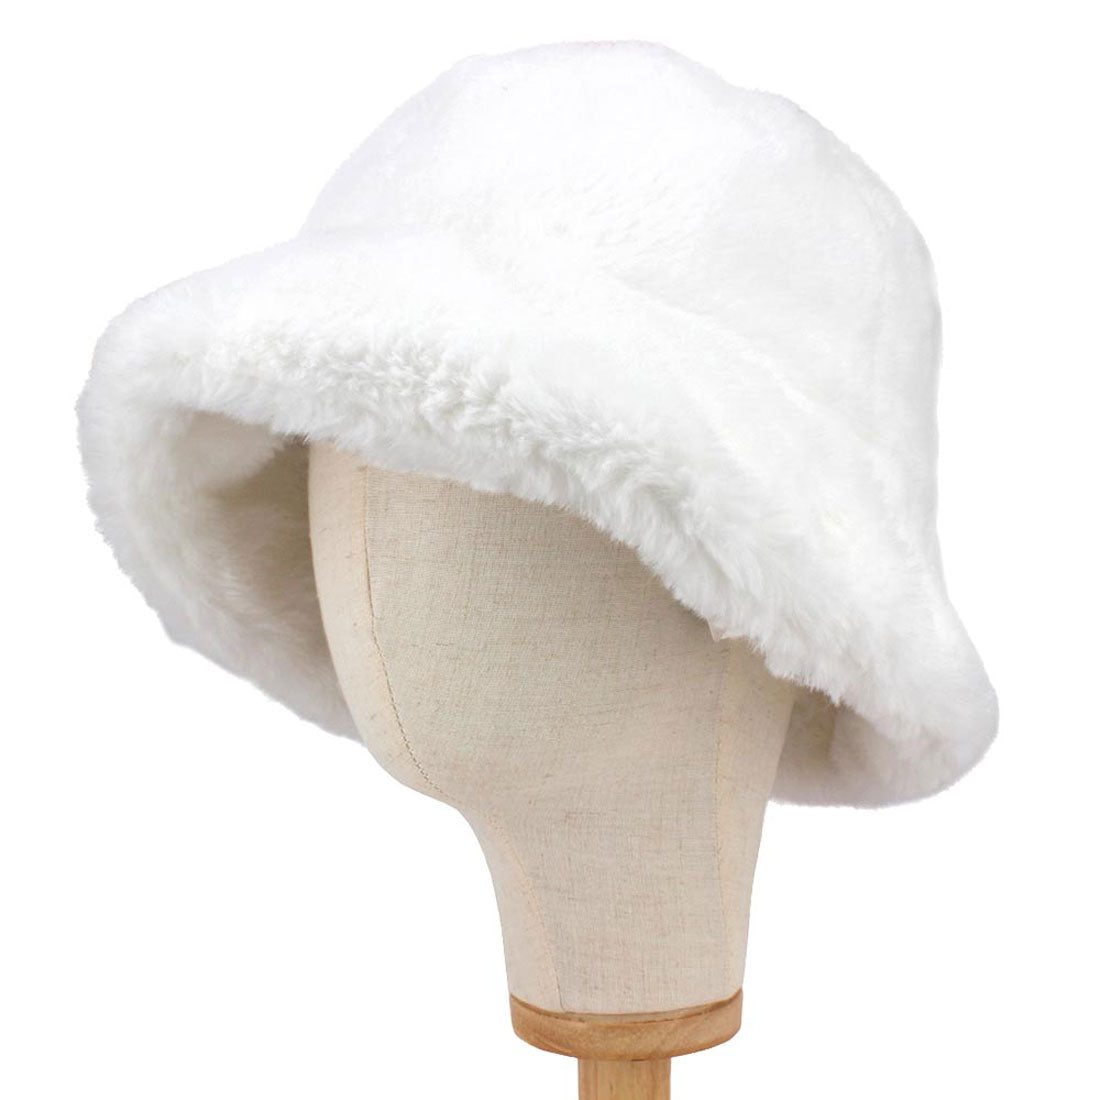 White Polyester Faux Fur Bucket Hat, stay warm and cozy, protect yourself from the cold, this most recongizable look with remarkable bold, soft & chic bucket hat, features a rounded design with a short brim. The hat is foldable, great for daytime. Perfect Gift for cold weather!